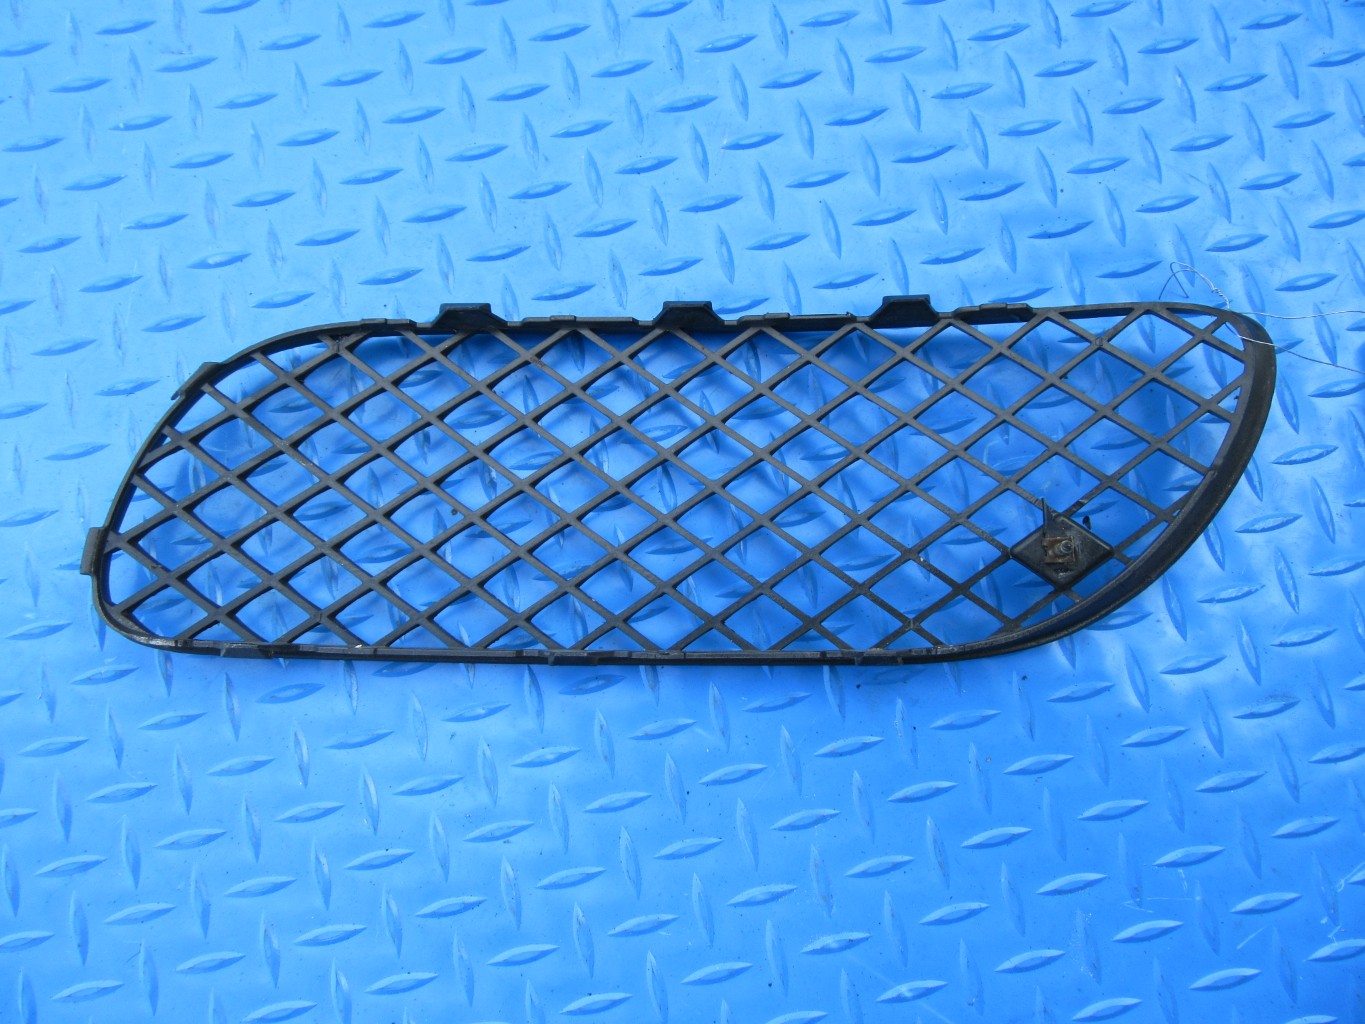 Bentley Continental GT GTC front bumper right grille #0249